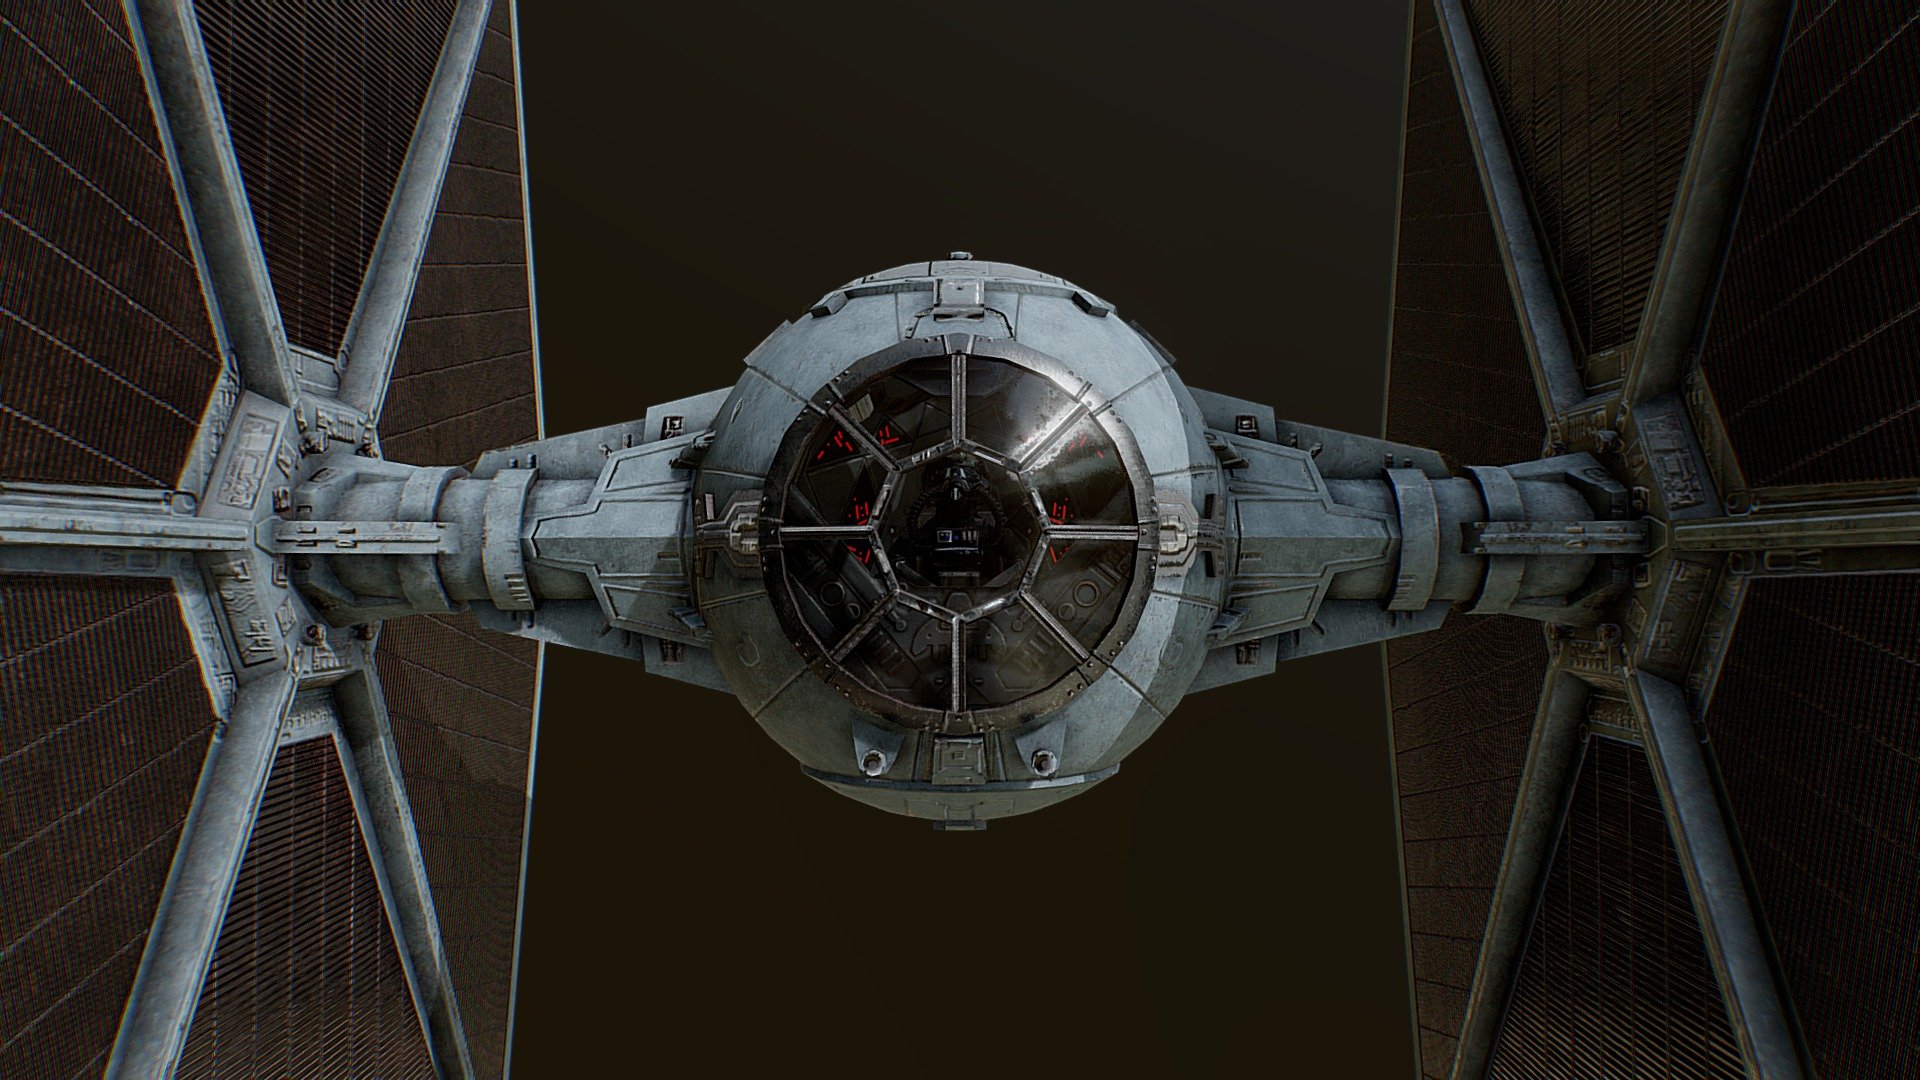 An update of my old low poly TIE fighter model, with windows cut in and a low poly interior, complete with pilot, added- adds a ton of depth and realism. None of it is meant to hold up in closeups, but it looks great from afar. The whole thing is ~5.5k tris, so if you want a hangar full or a fleet of them, it won't slow down your scene. Perfect for all your imperial needs!

PBR textures made in Substance Painter. The exterior is 2k, the interior is 1k, the pilot is 512x512.

Cutting in the windows a couple years after the outside model was done made for some very messy topology around them, but the overall ship is still low poly enough, and no one will notice. The glass is also currently single-sided, just to be more performant than trying to have glass with thickness and refraction. If you are using them as distant background models you can also make the glass opaque and delete the interior for more savings 3d model